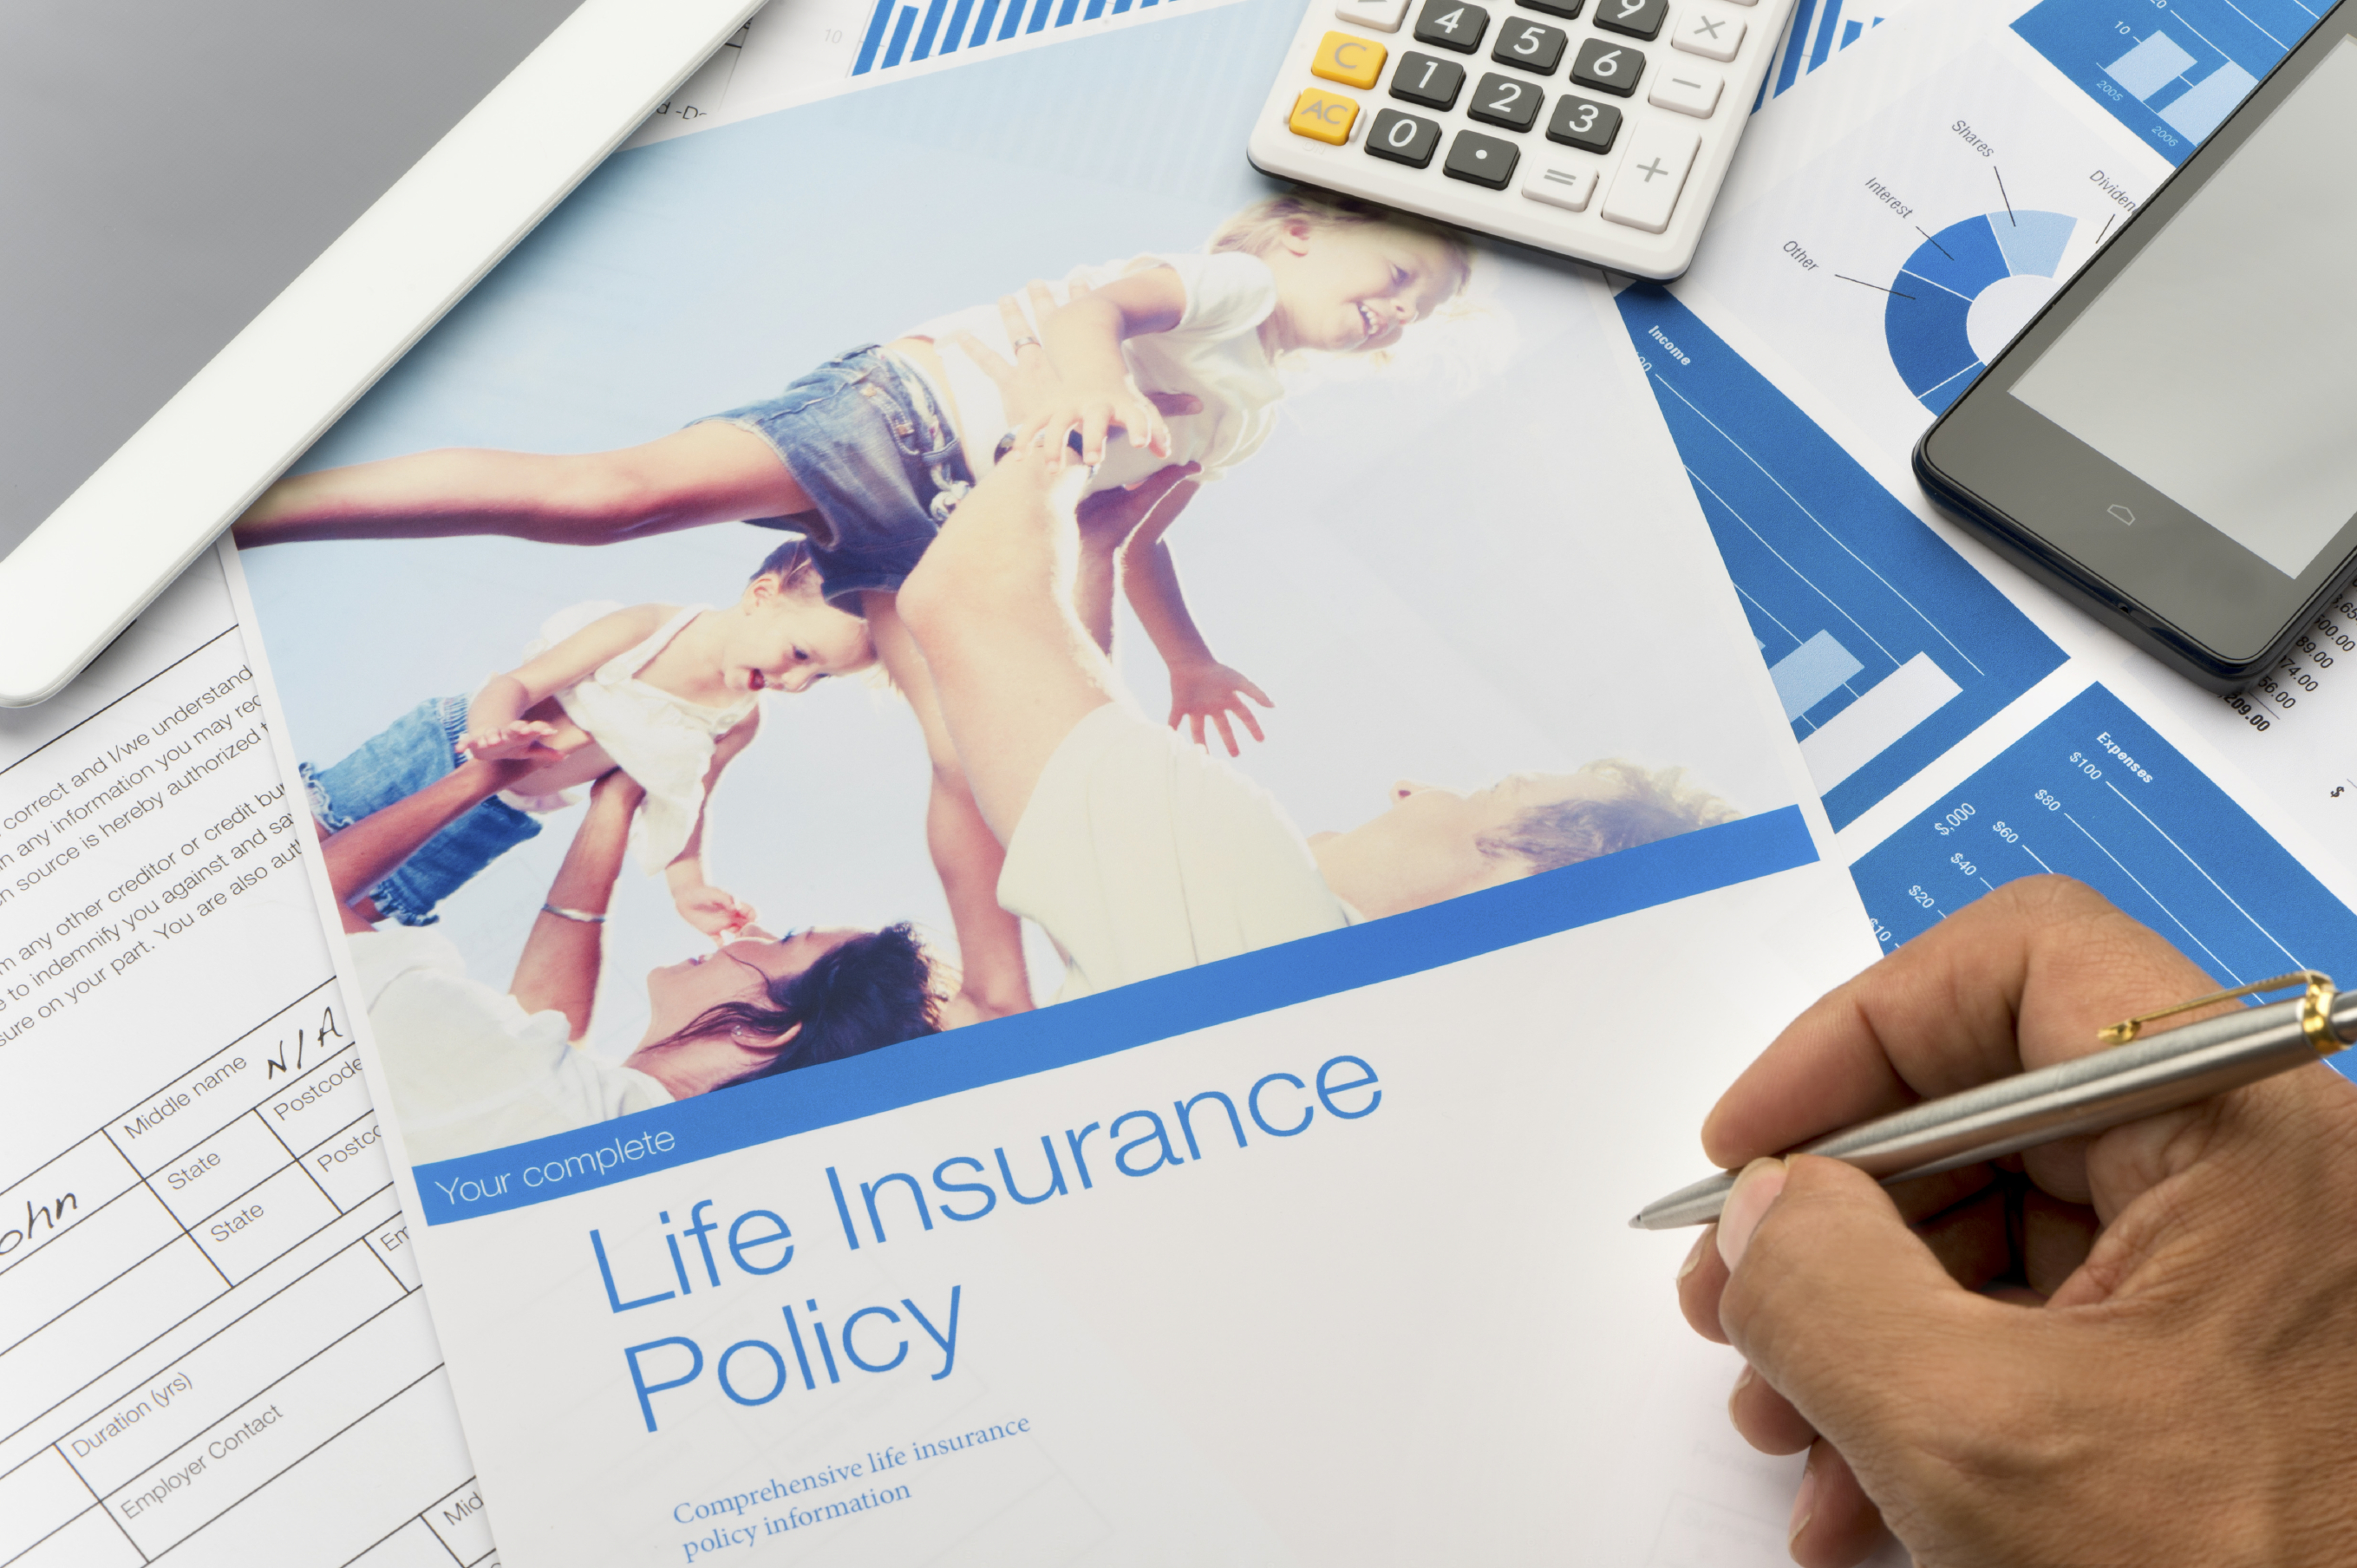 Life insurance brochure with family image and paperwork. The included image can be found in my portfolio. Image  #37803180